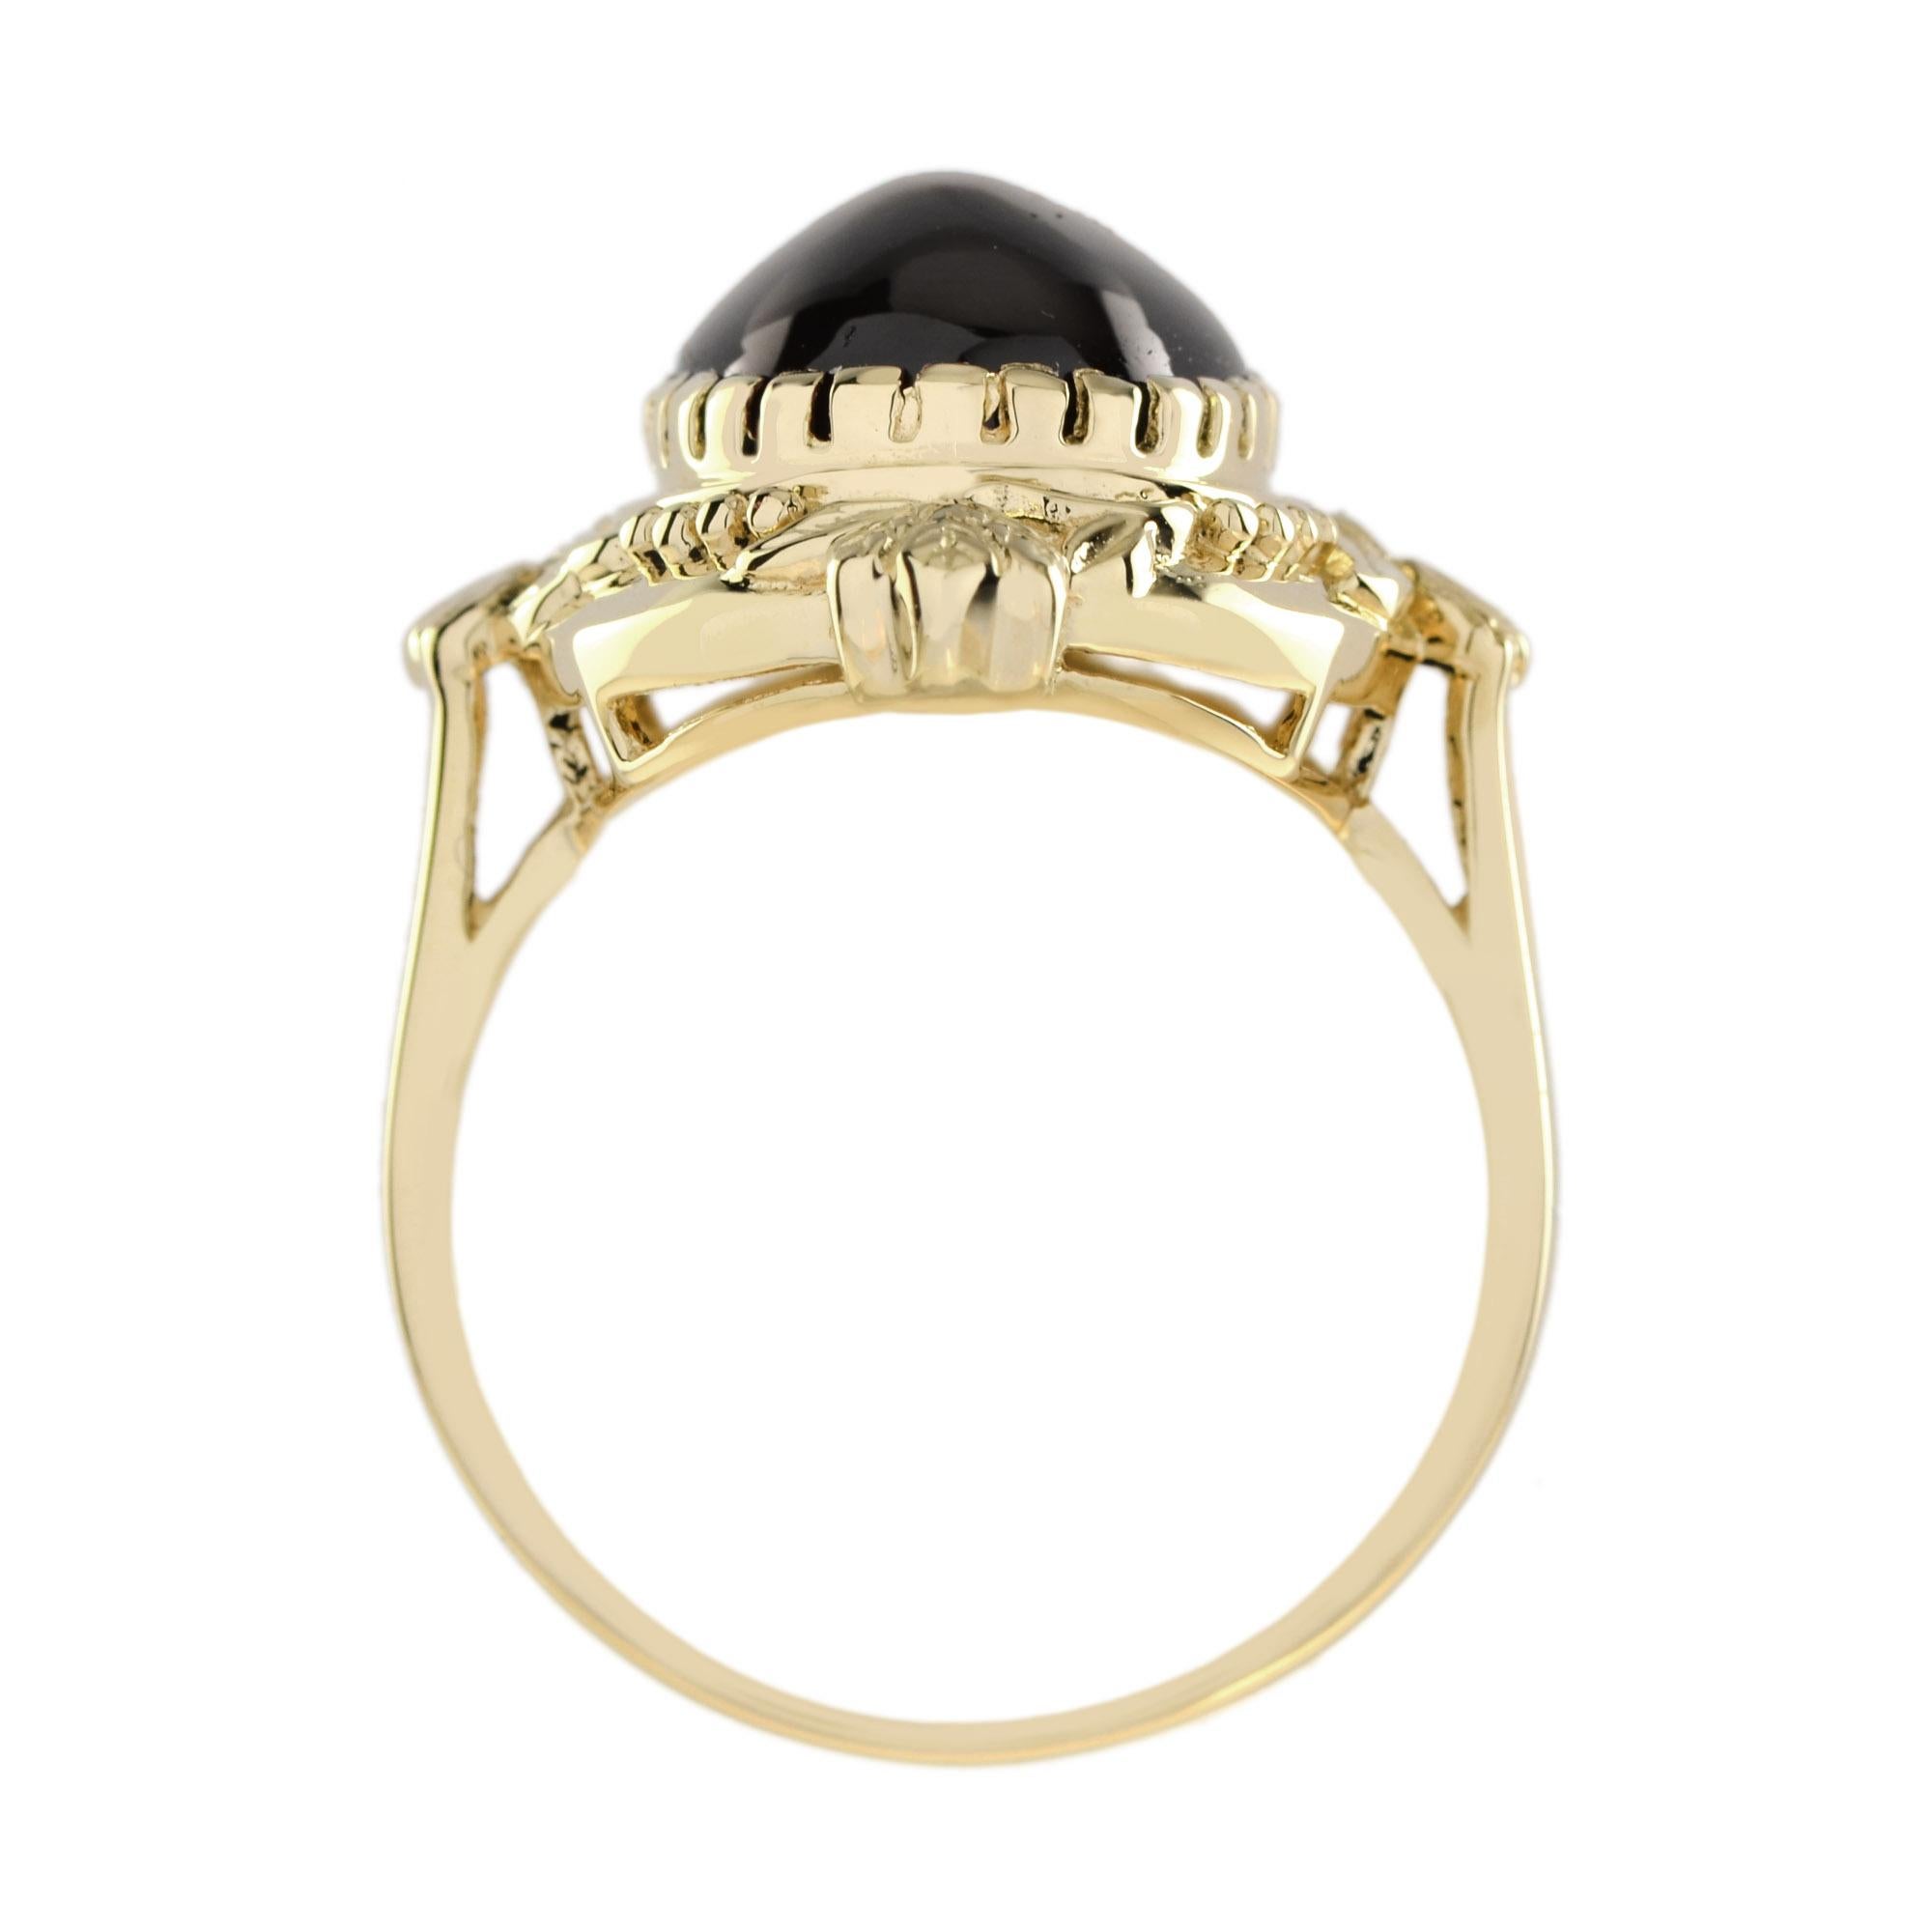 Women's or Men's Vintage Style Cabochon Garnet Cocktail Ring in 9K Yellow Gold